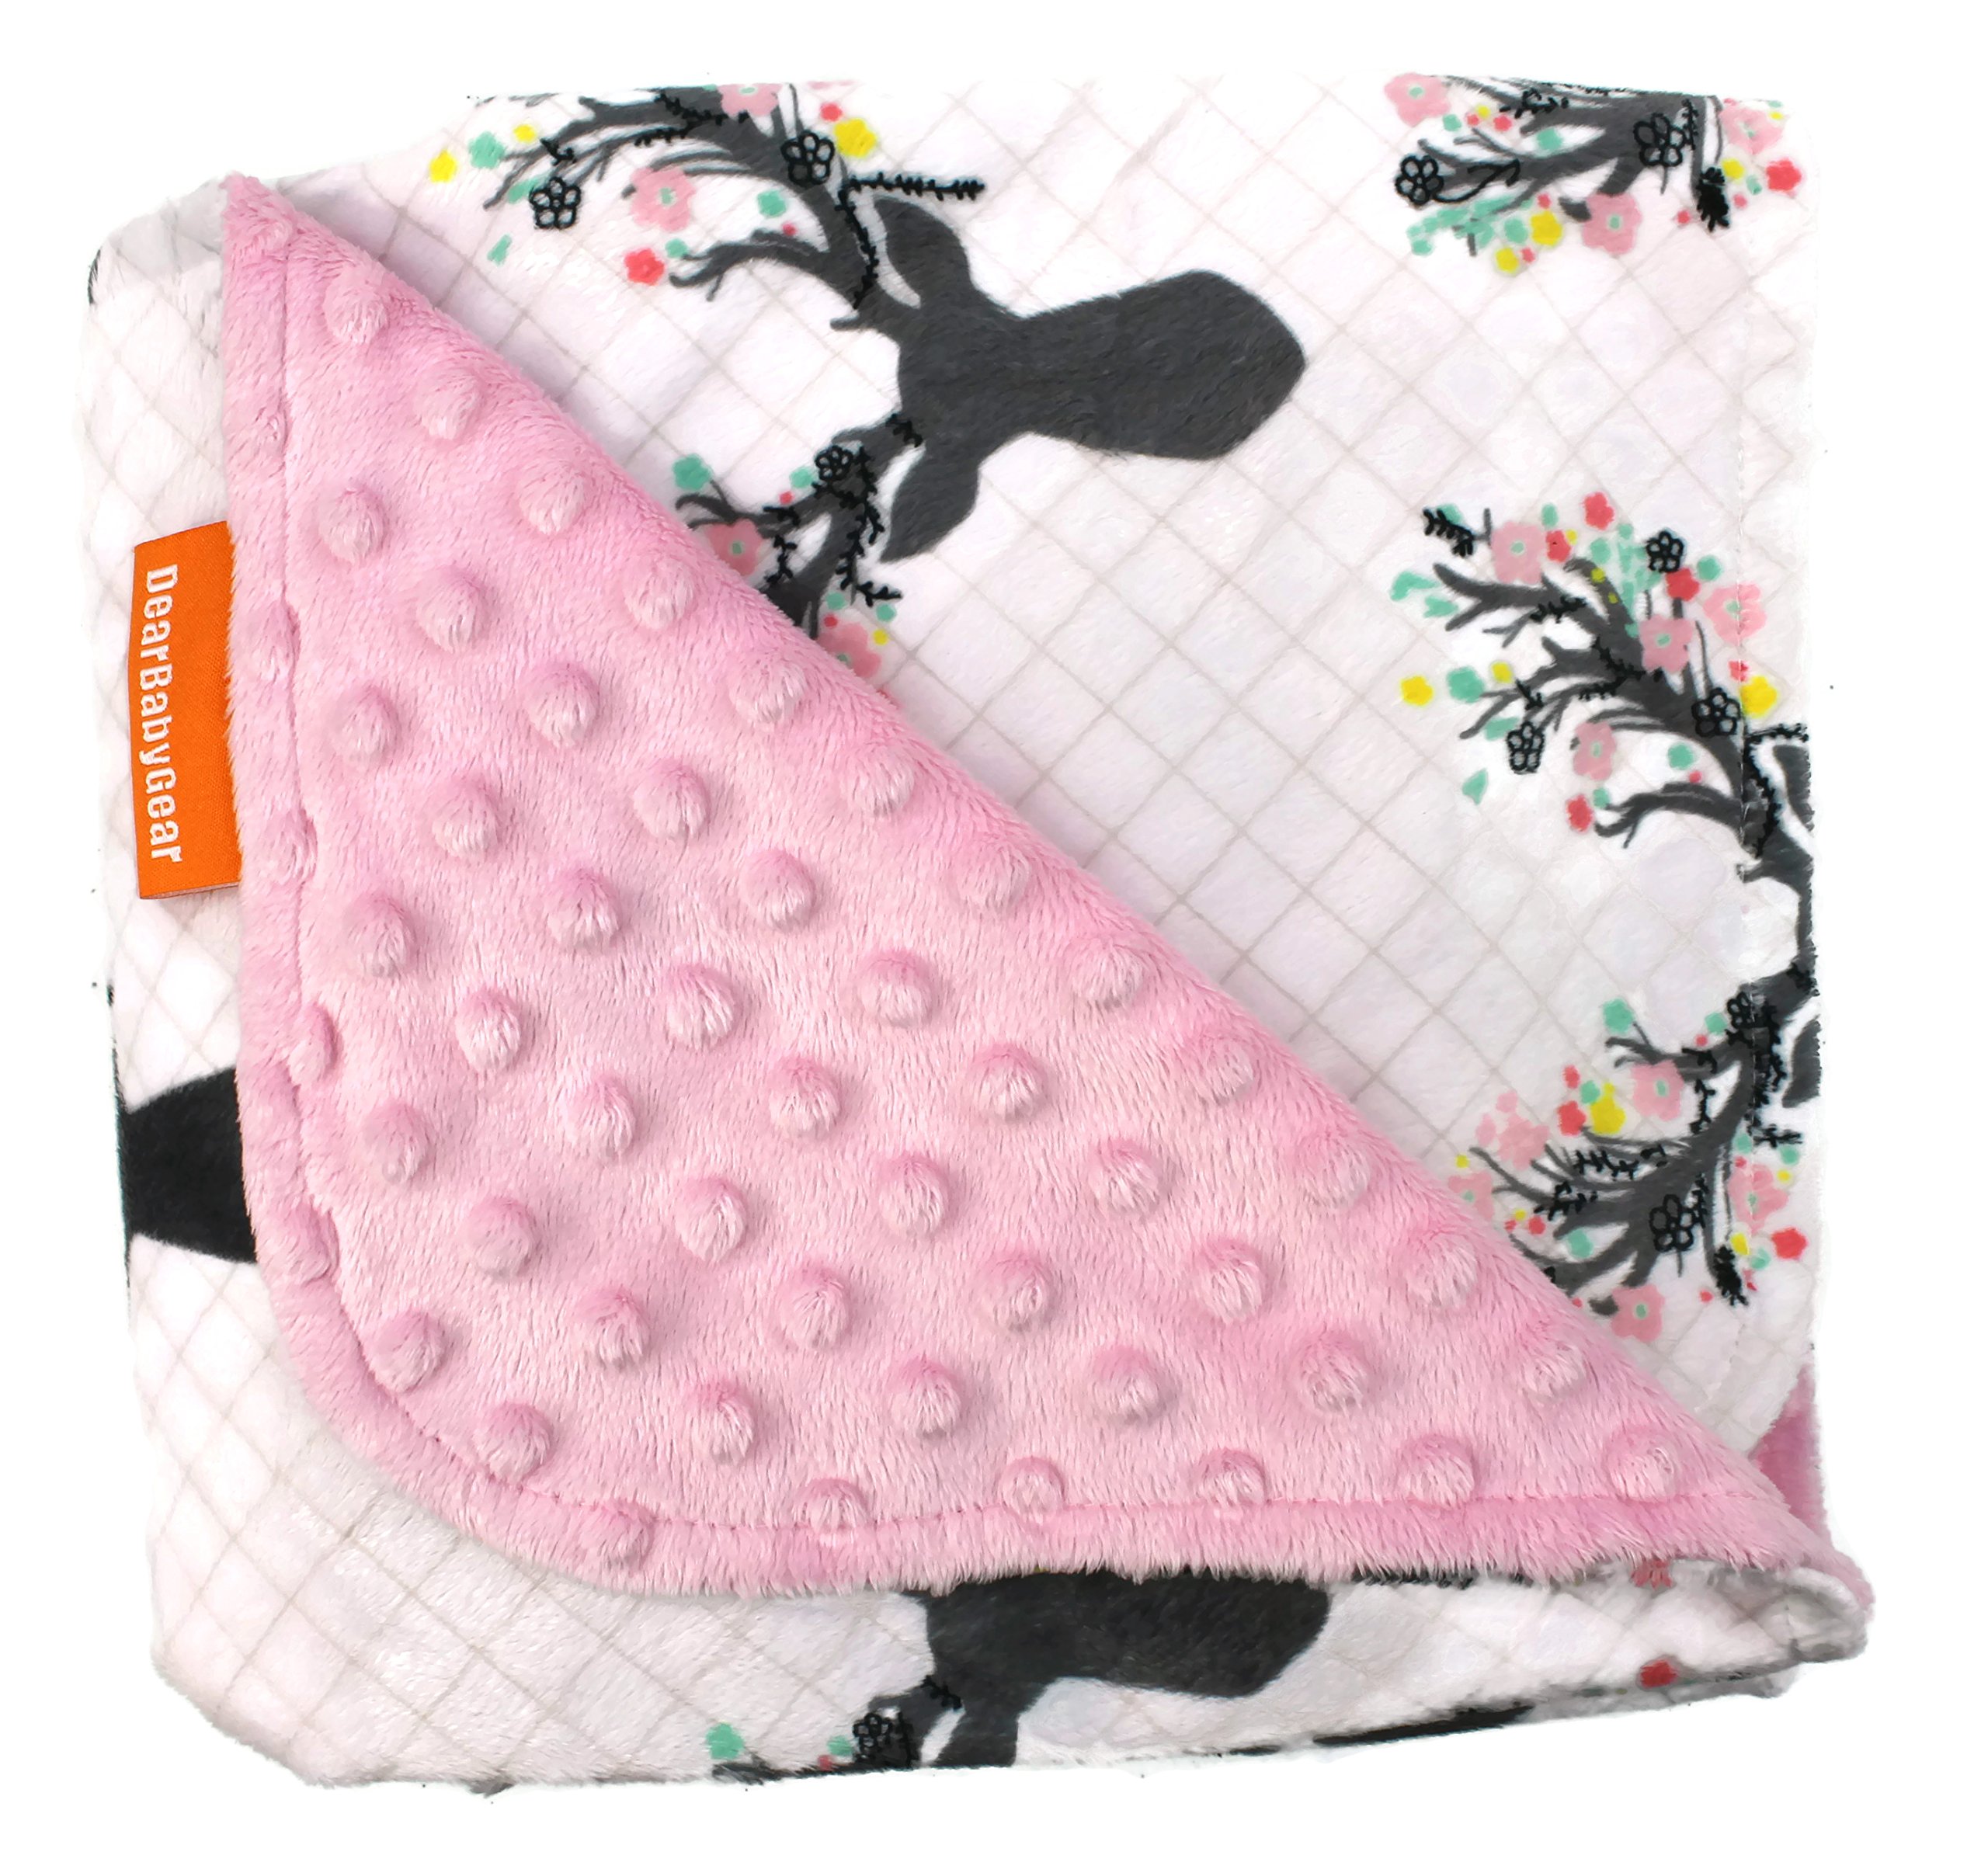 Dear Baby Gear Antlers and Flowers Bundle: Baby Car Seat Canopy and Baby Blanket - Pink Minky and Floral Design for Baby Girls - Snap Opening, Lightweight Carseat Cover, Warm Crib Quilt, and Infant Bl